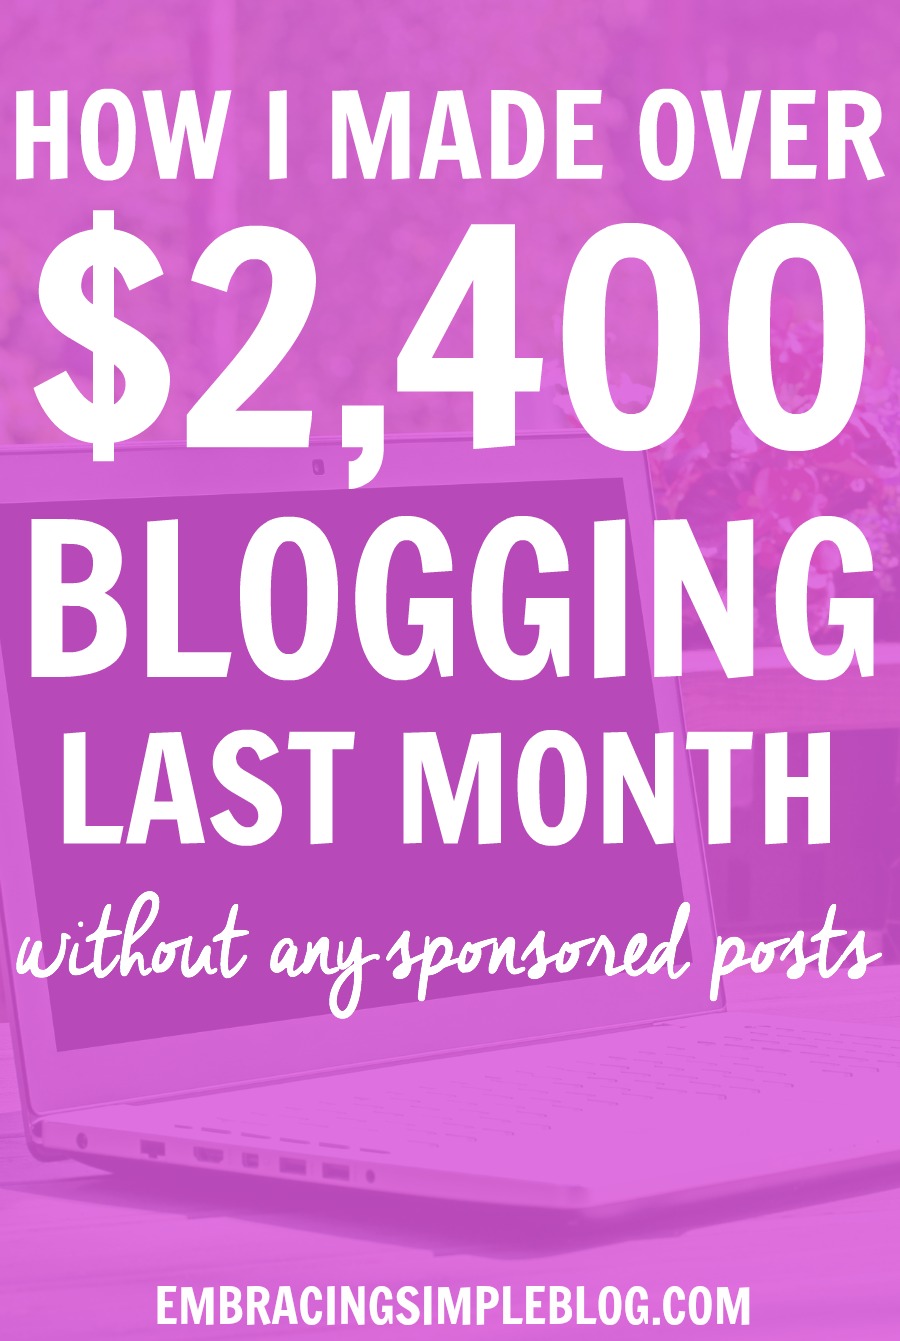 Want to know how I made over $2,400 from blogging last month as a stay-at-home Mom? Click to read exactly how I earn an income from blogging in my January 2016 Blog Income and Traffic Report!